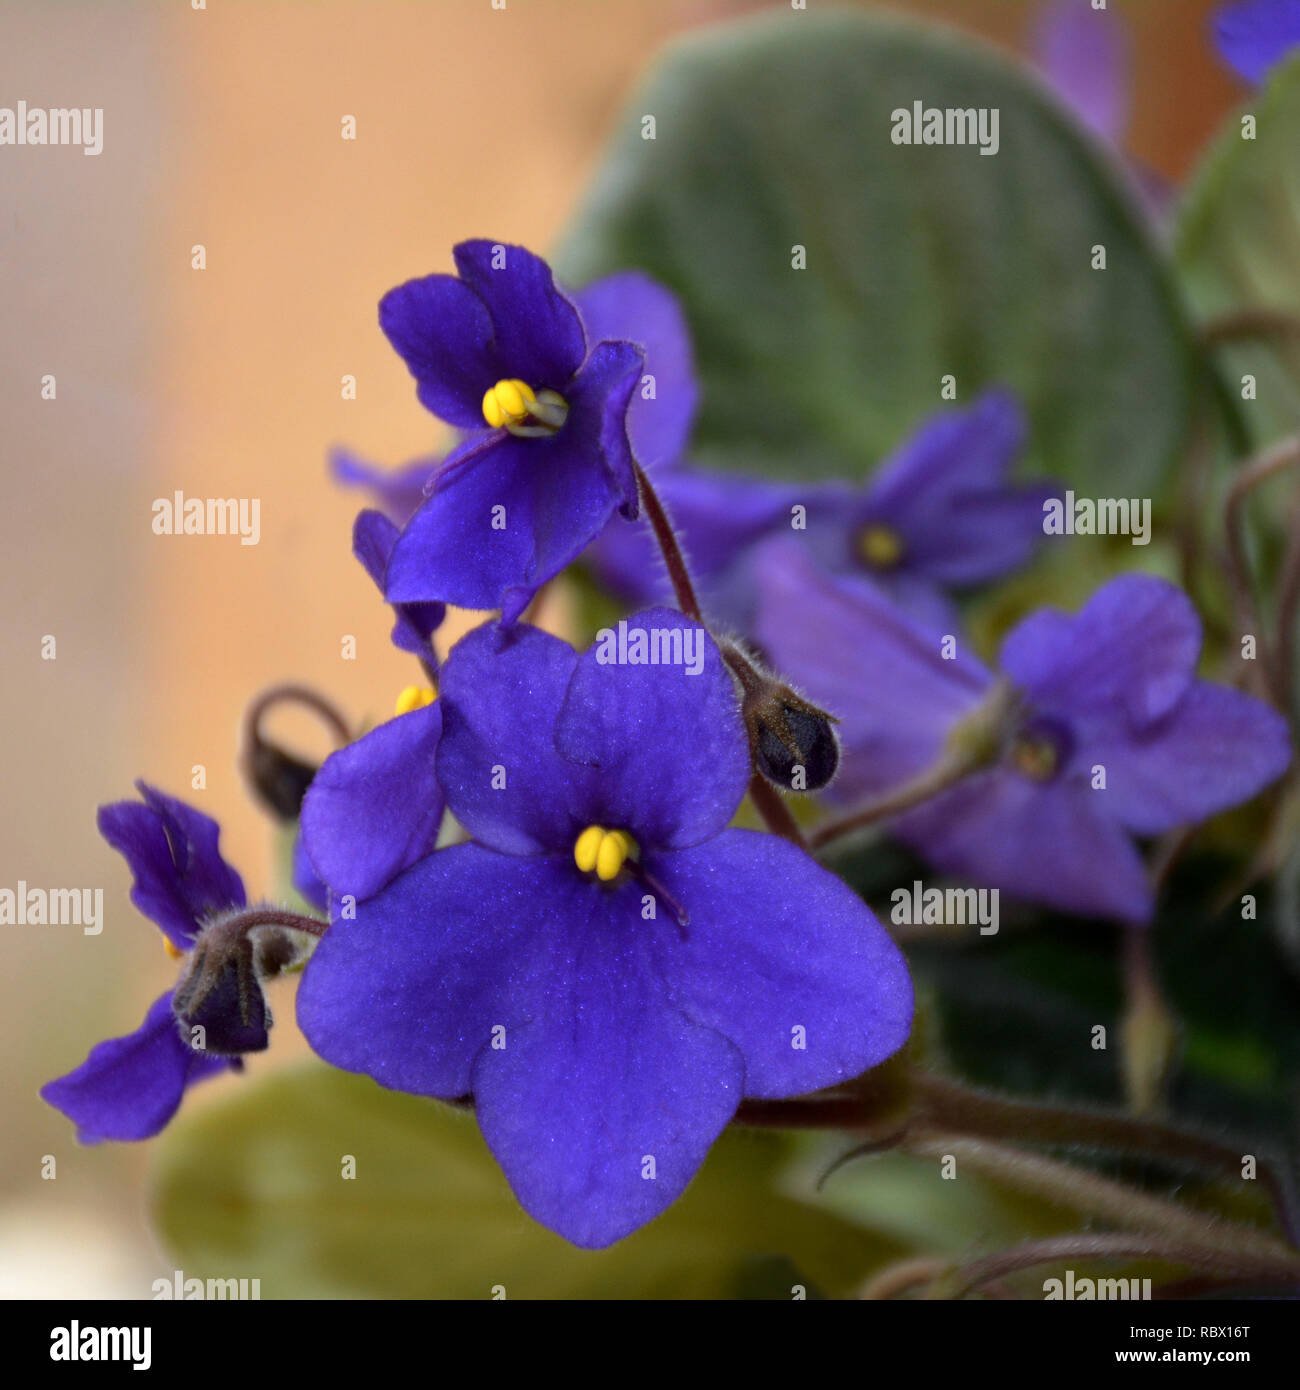 Violet flower with green leaves (Viola) Stock Photo